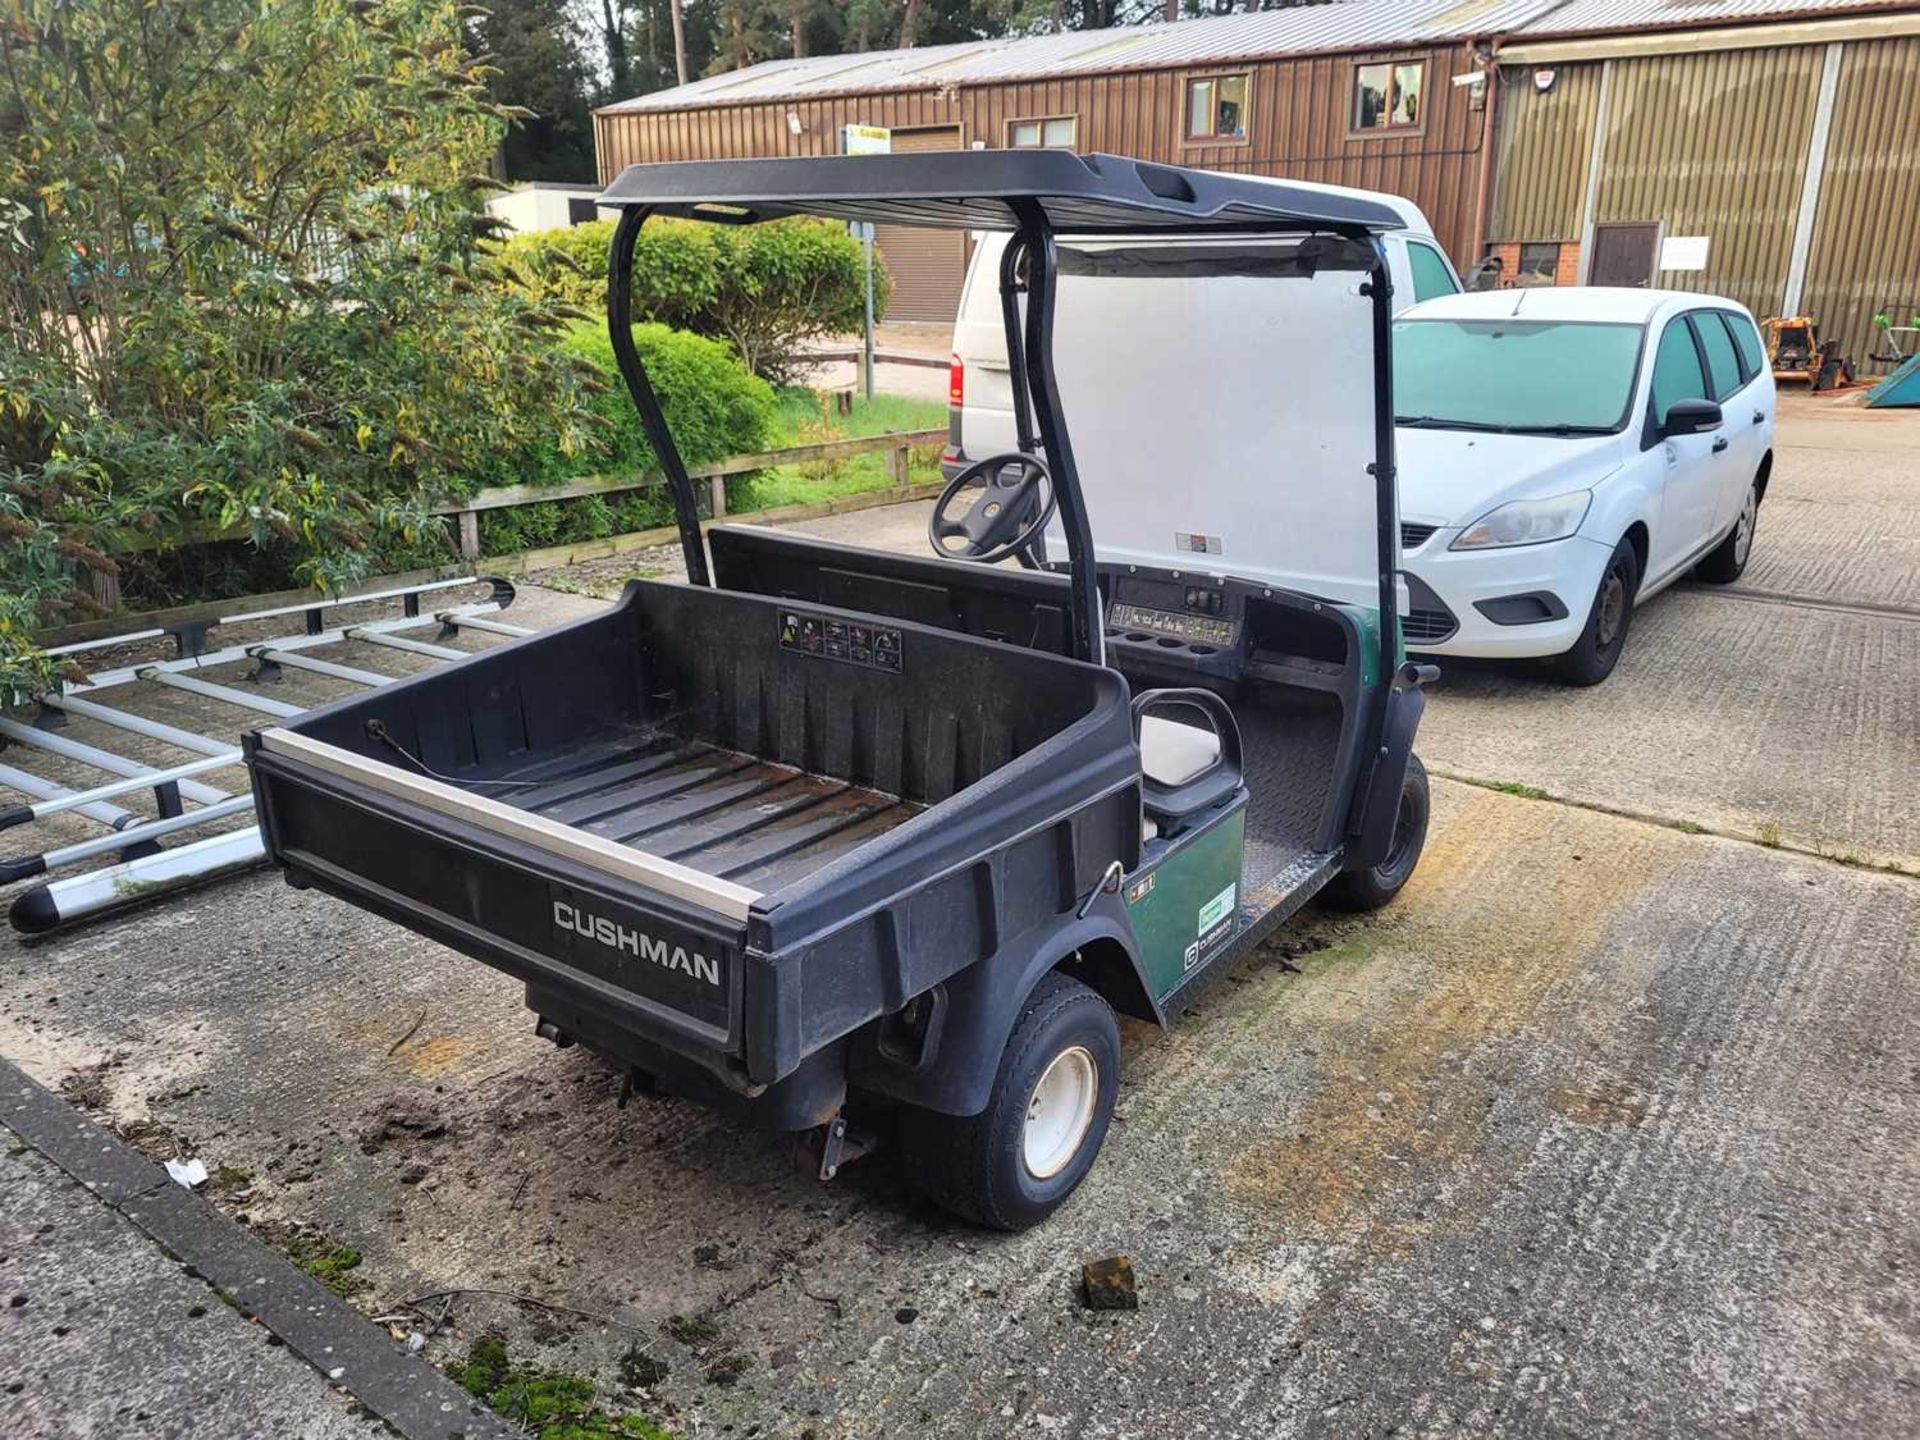 Cushman Hauler 800E Golf Buggy. (Year 2017). Comes with mains charger. (Located in Euston, Thetford) - Image 3 of 5